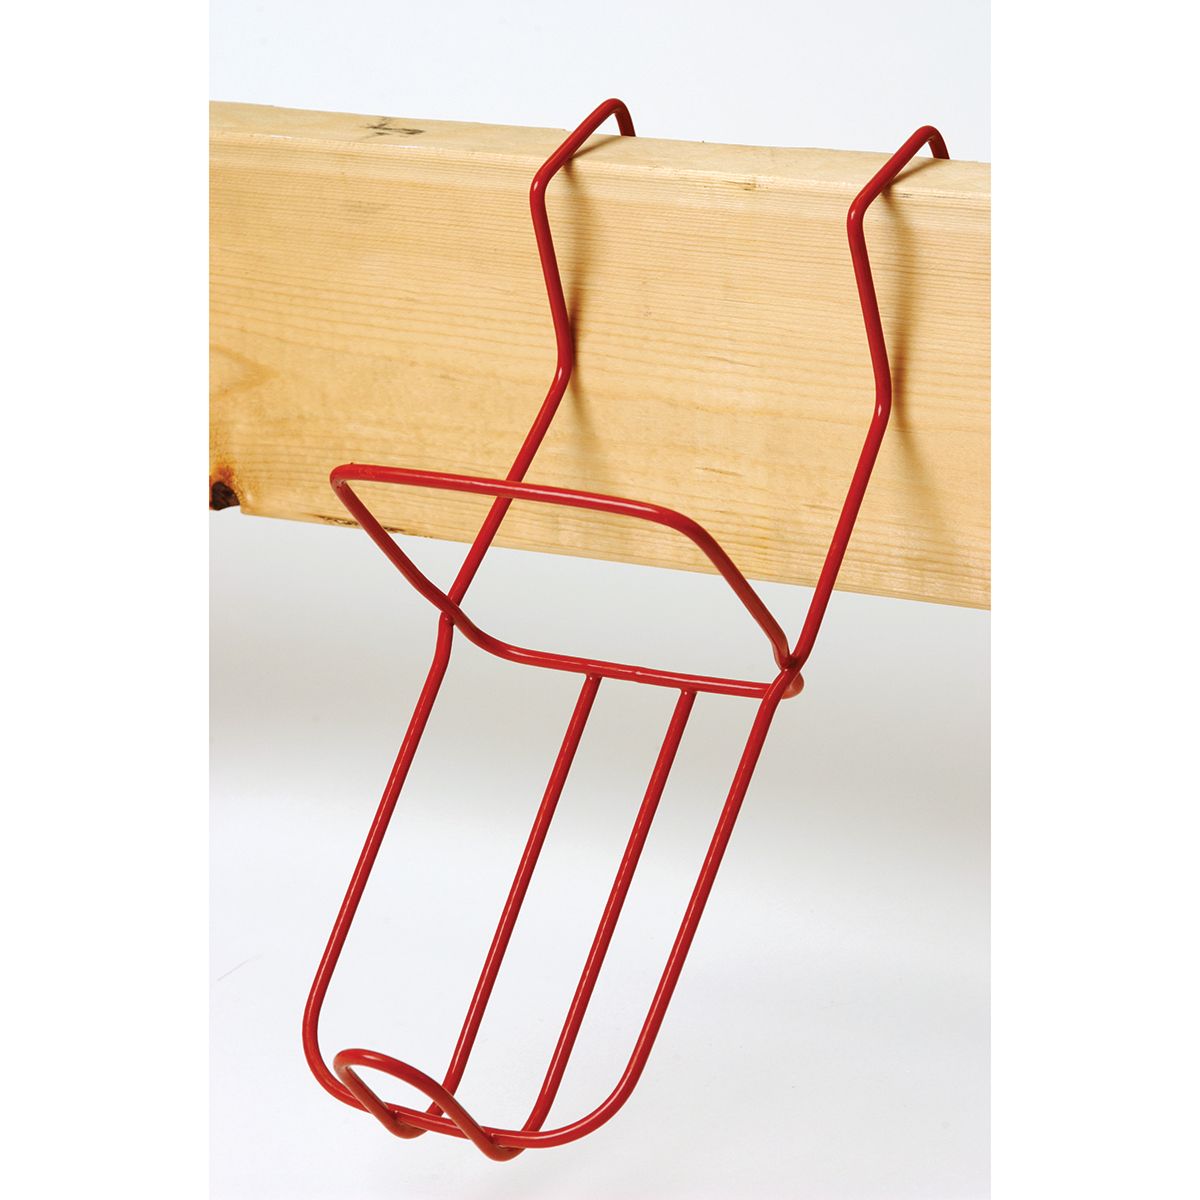 CALF BOTTLE HANGER FOR 98 BOTTLE FITS ANY 2-BY NIPPLE TEAT CALF COW BABY FOAL 